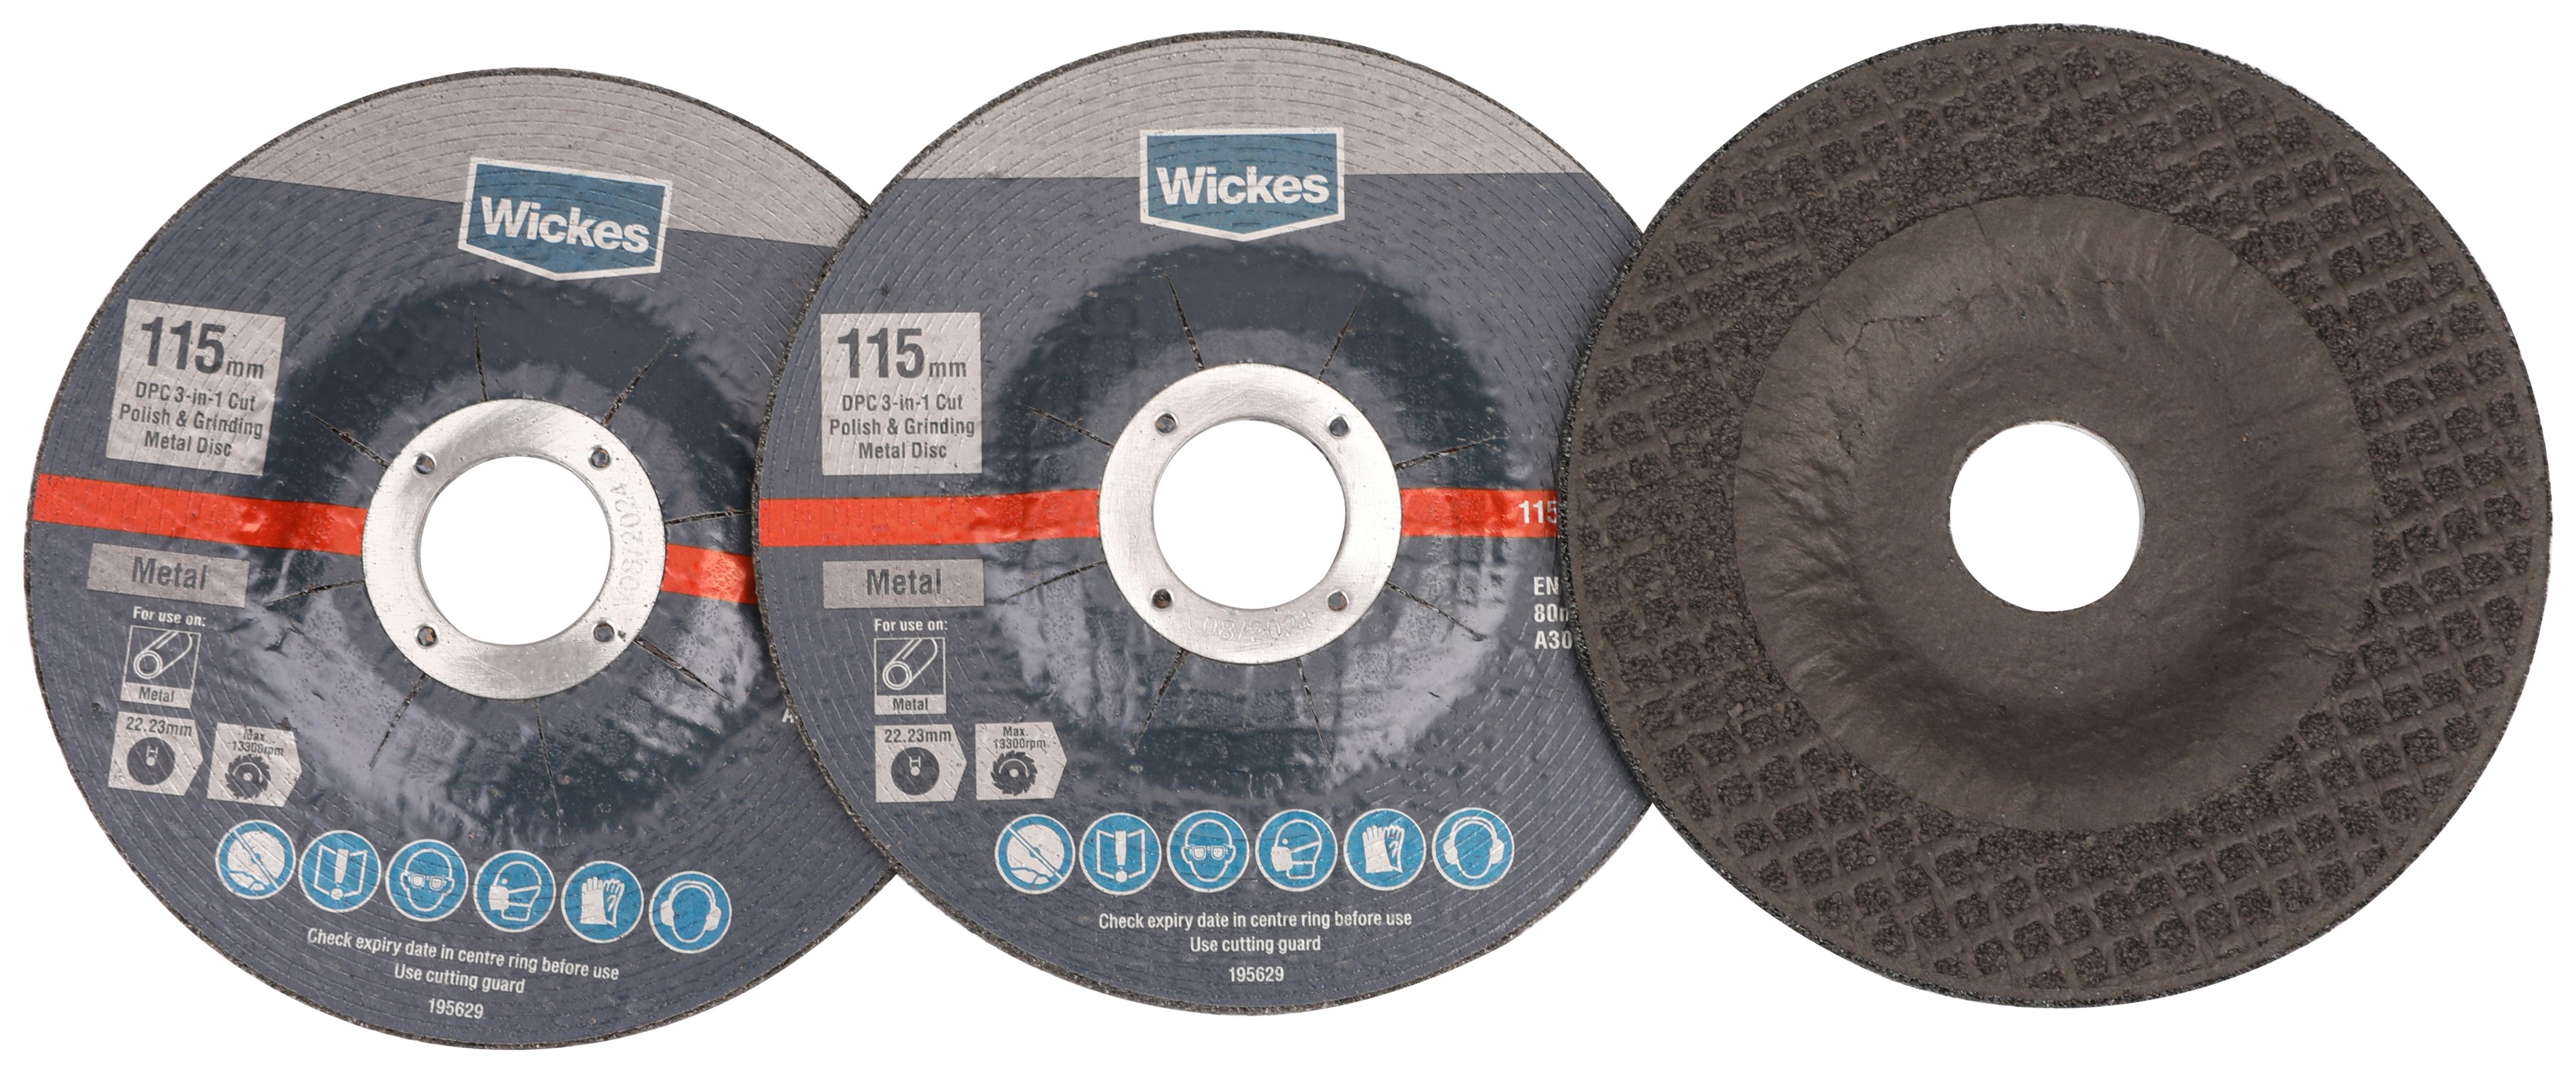 Image of Wickes DPC 3-in-1 Cut Polish & Grinding Metal Disc 115mm - Pack of 3